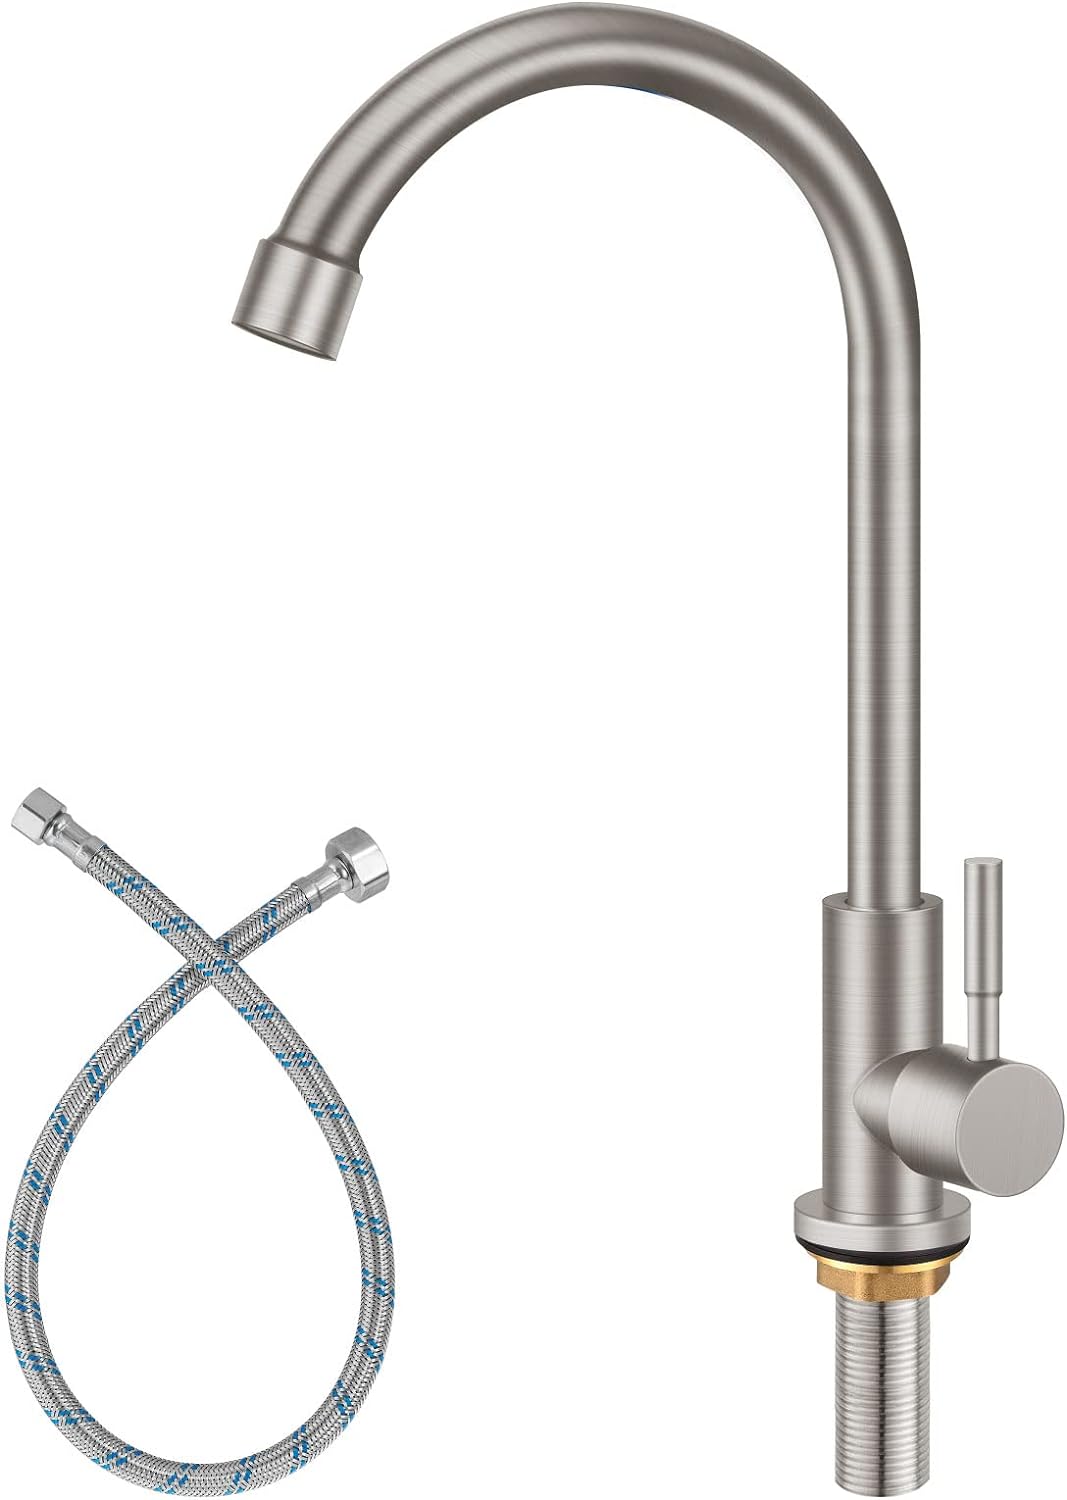 I purchased this product in 2021 for our wet bar. We converted from a dated 80s style to more modern industrial look. This faucet worked great and fit in well with our theme.The best part came 2 (!) years later when the faucet started dripping after we turned it off. I contacted the company for help and they quickly sent me a replacement unit. I uninstalled the old one, installed the new one, and our wet bar is back in service!